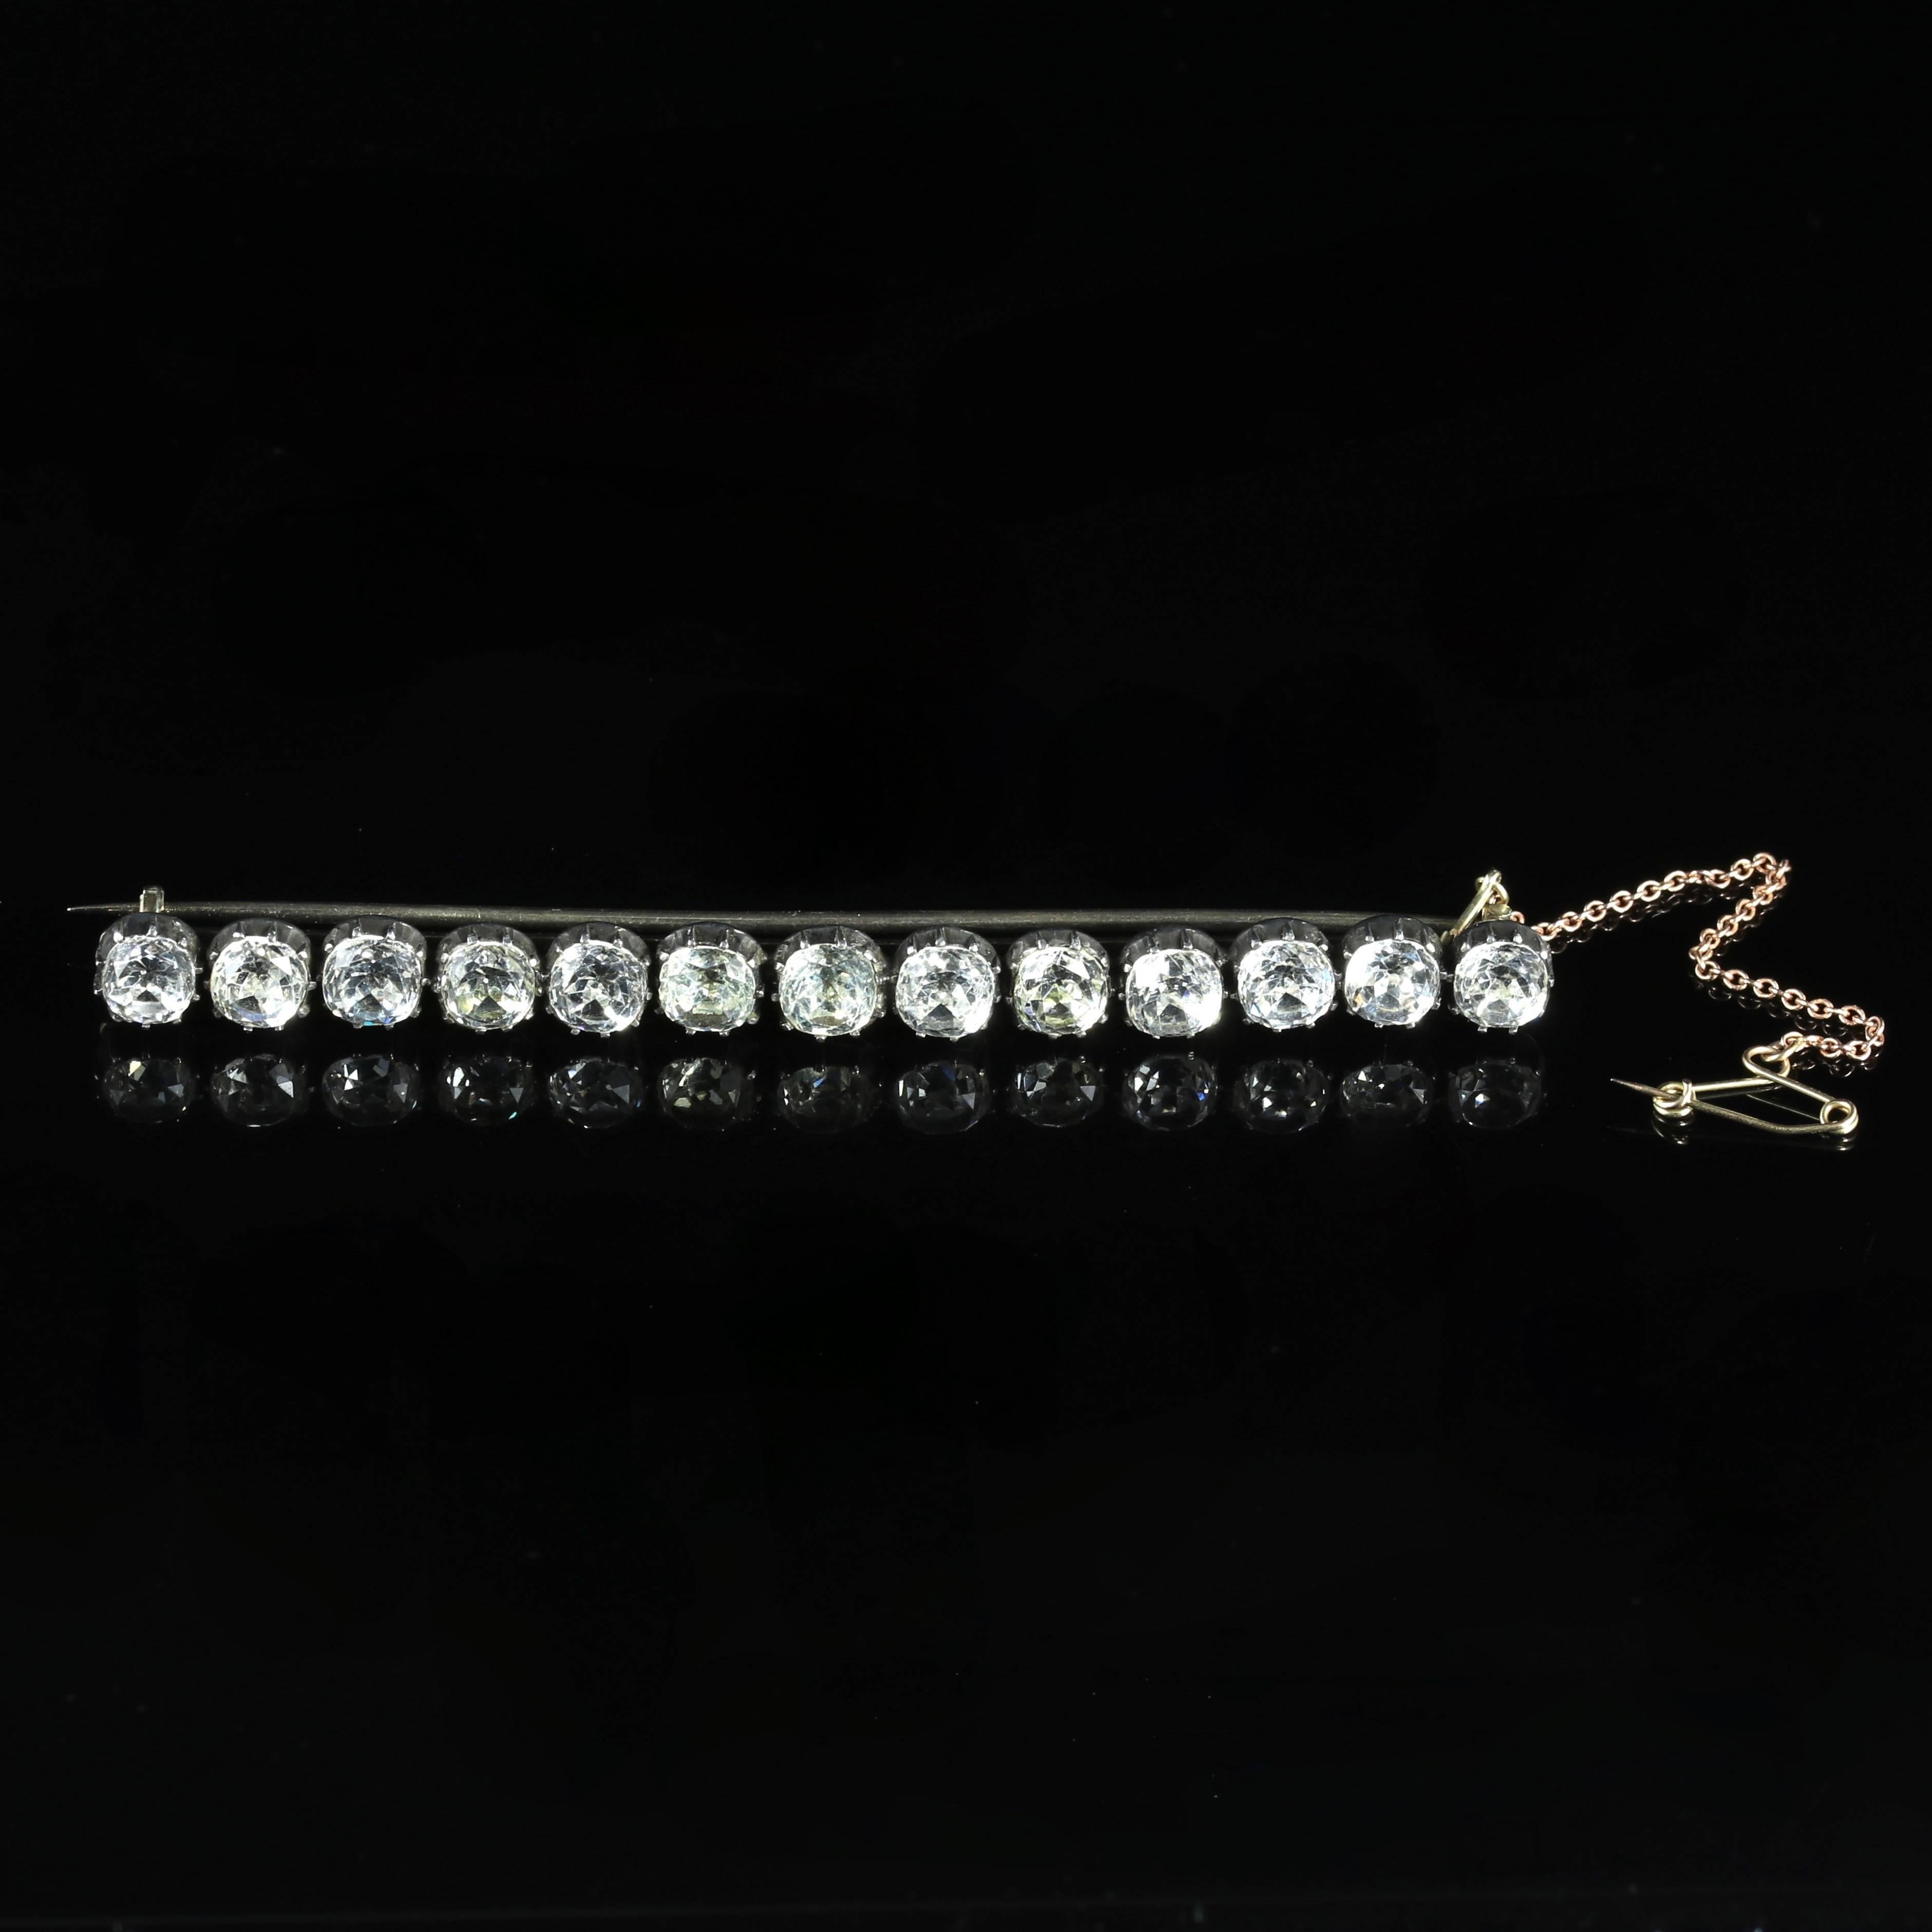 This exquisite fabulous long Sterling Sliver brooch is adorned with large old cut Paste Stones.

13 fabulous old cut Paste Stones are set into this amazing Georgian brooch.

Paste is a heavy, very transparent flint glass that stimulates the fire and